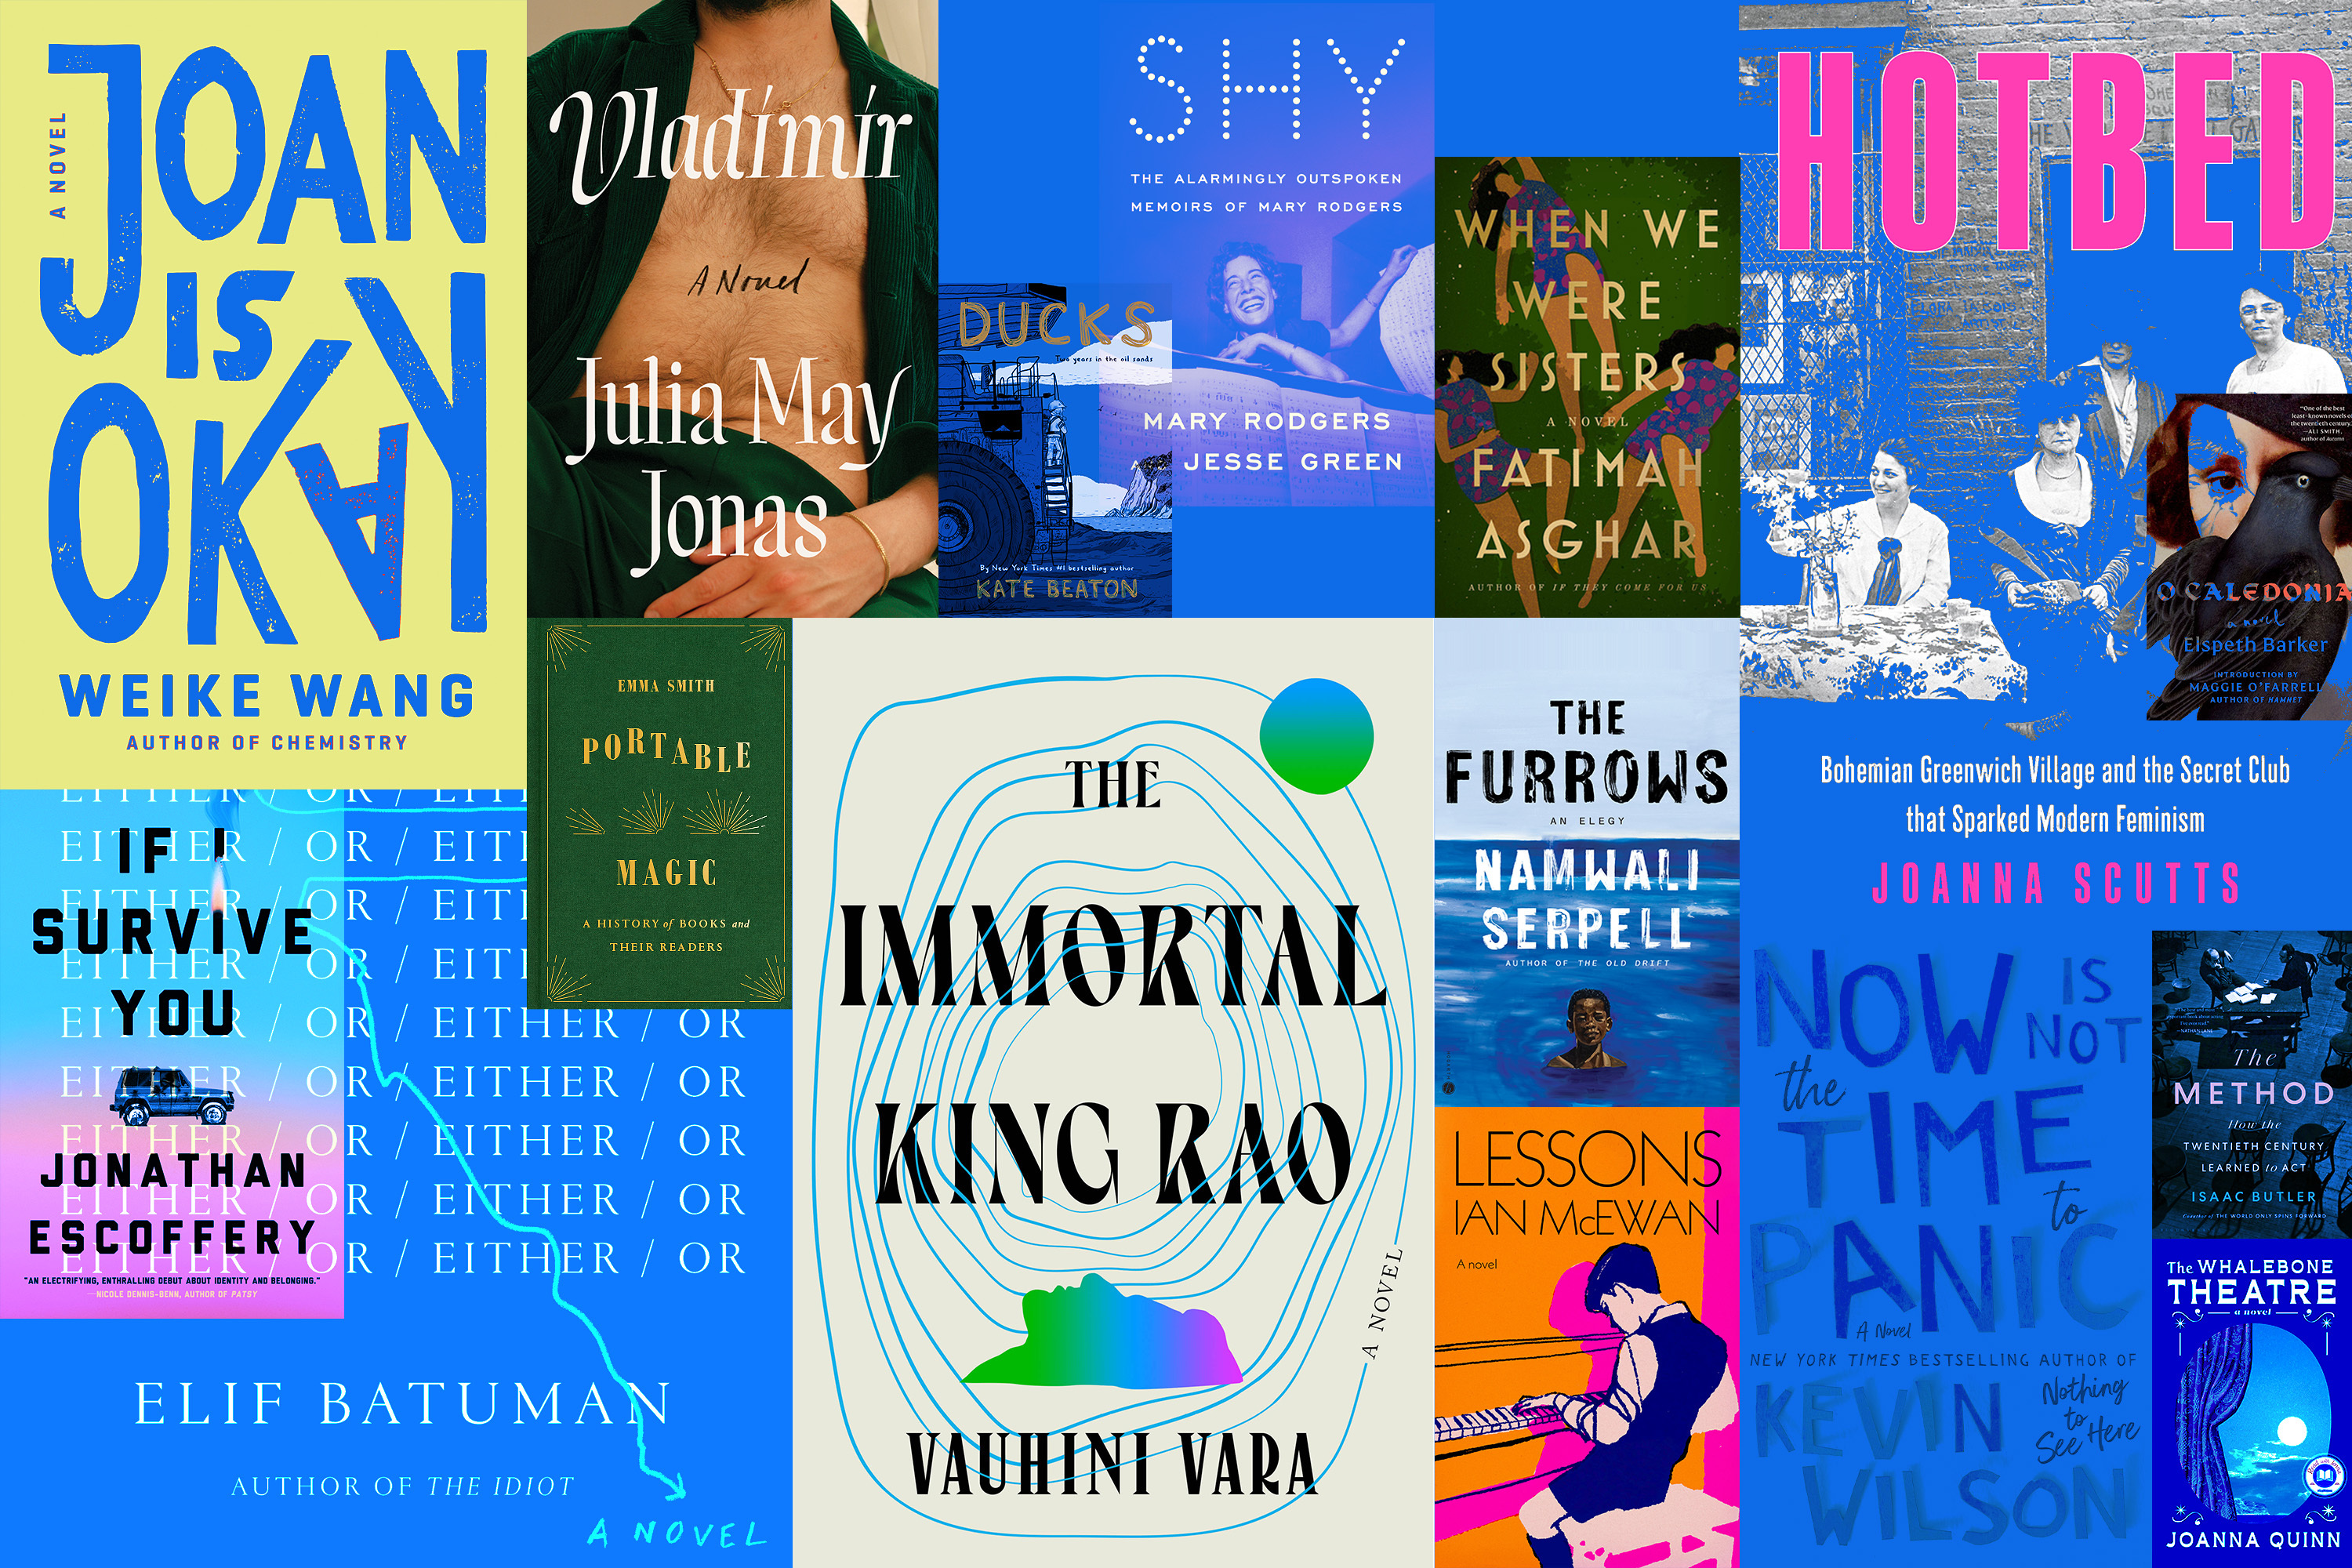 A collage of book covers, including “The Immortal King Rao and “Joan Is Okay.”